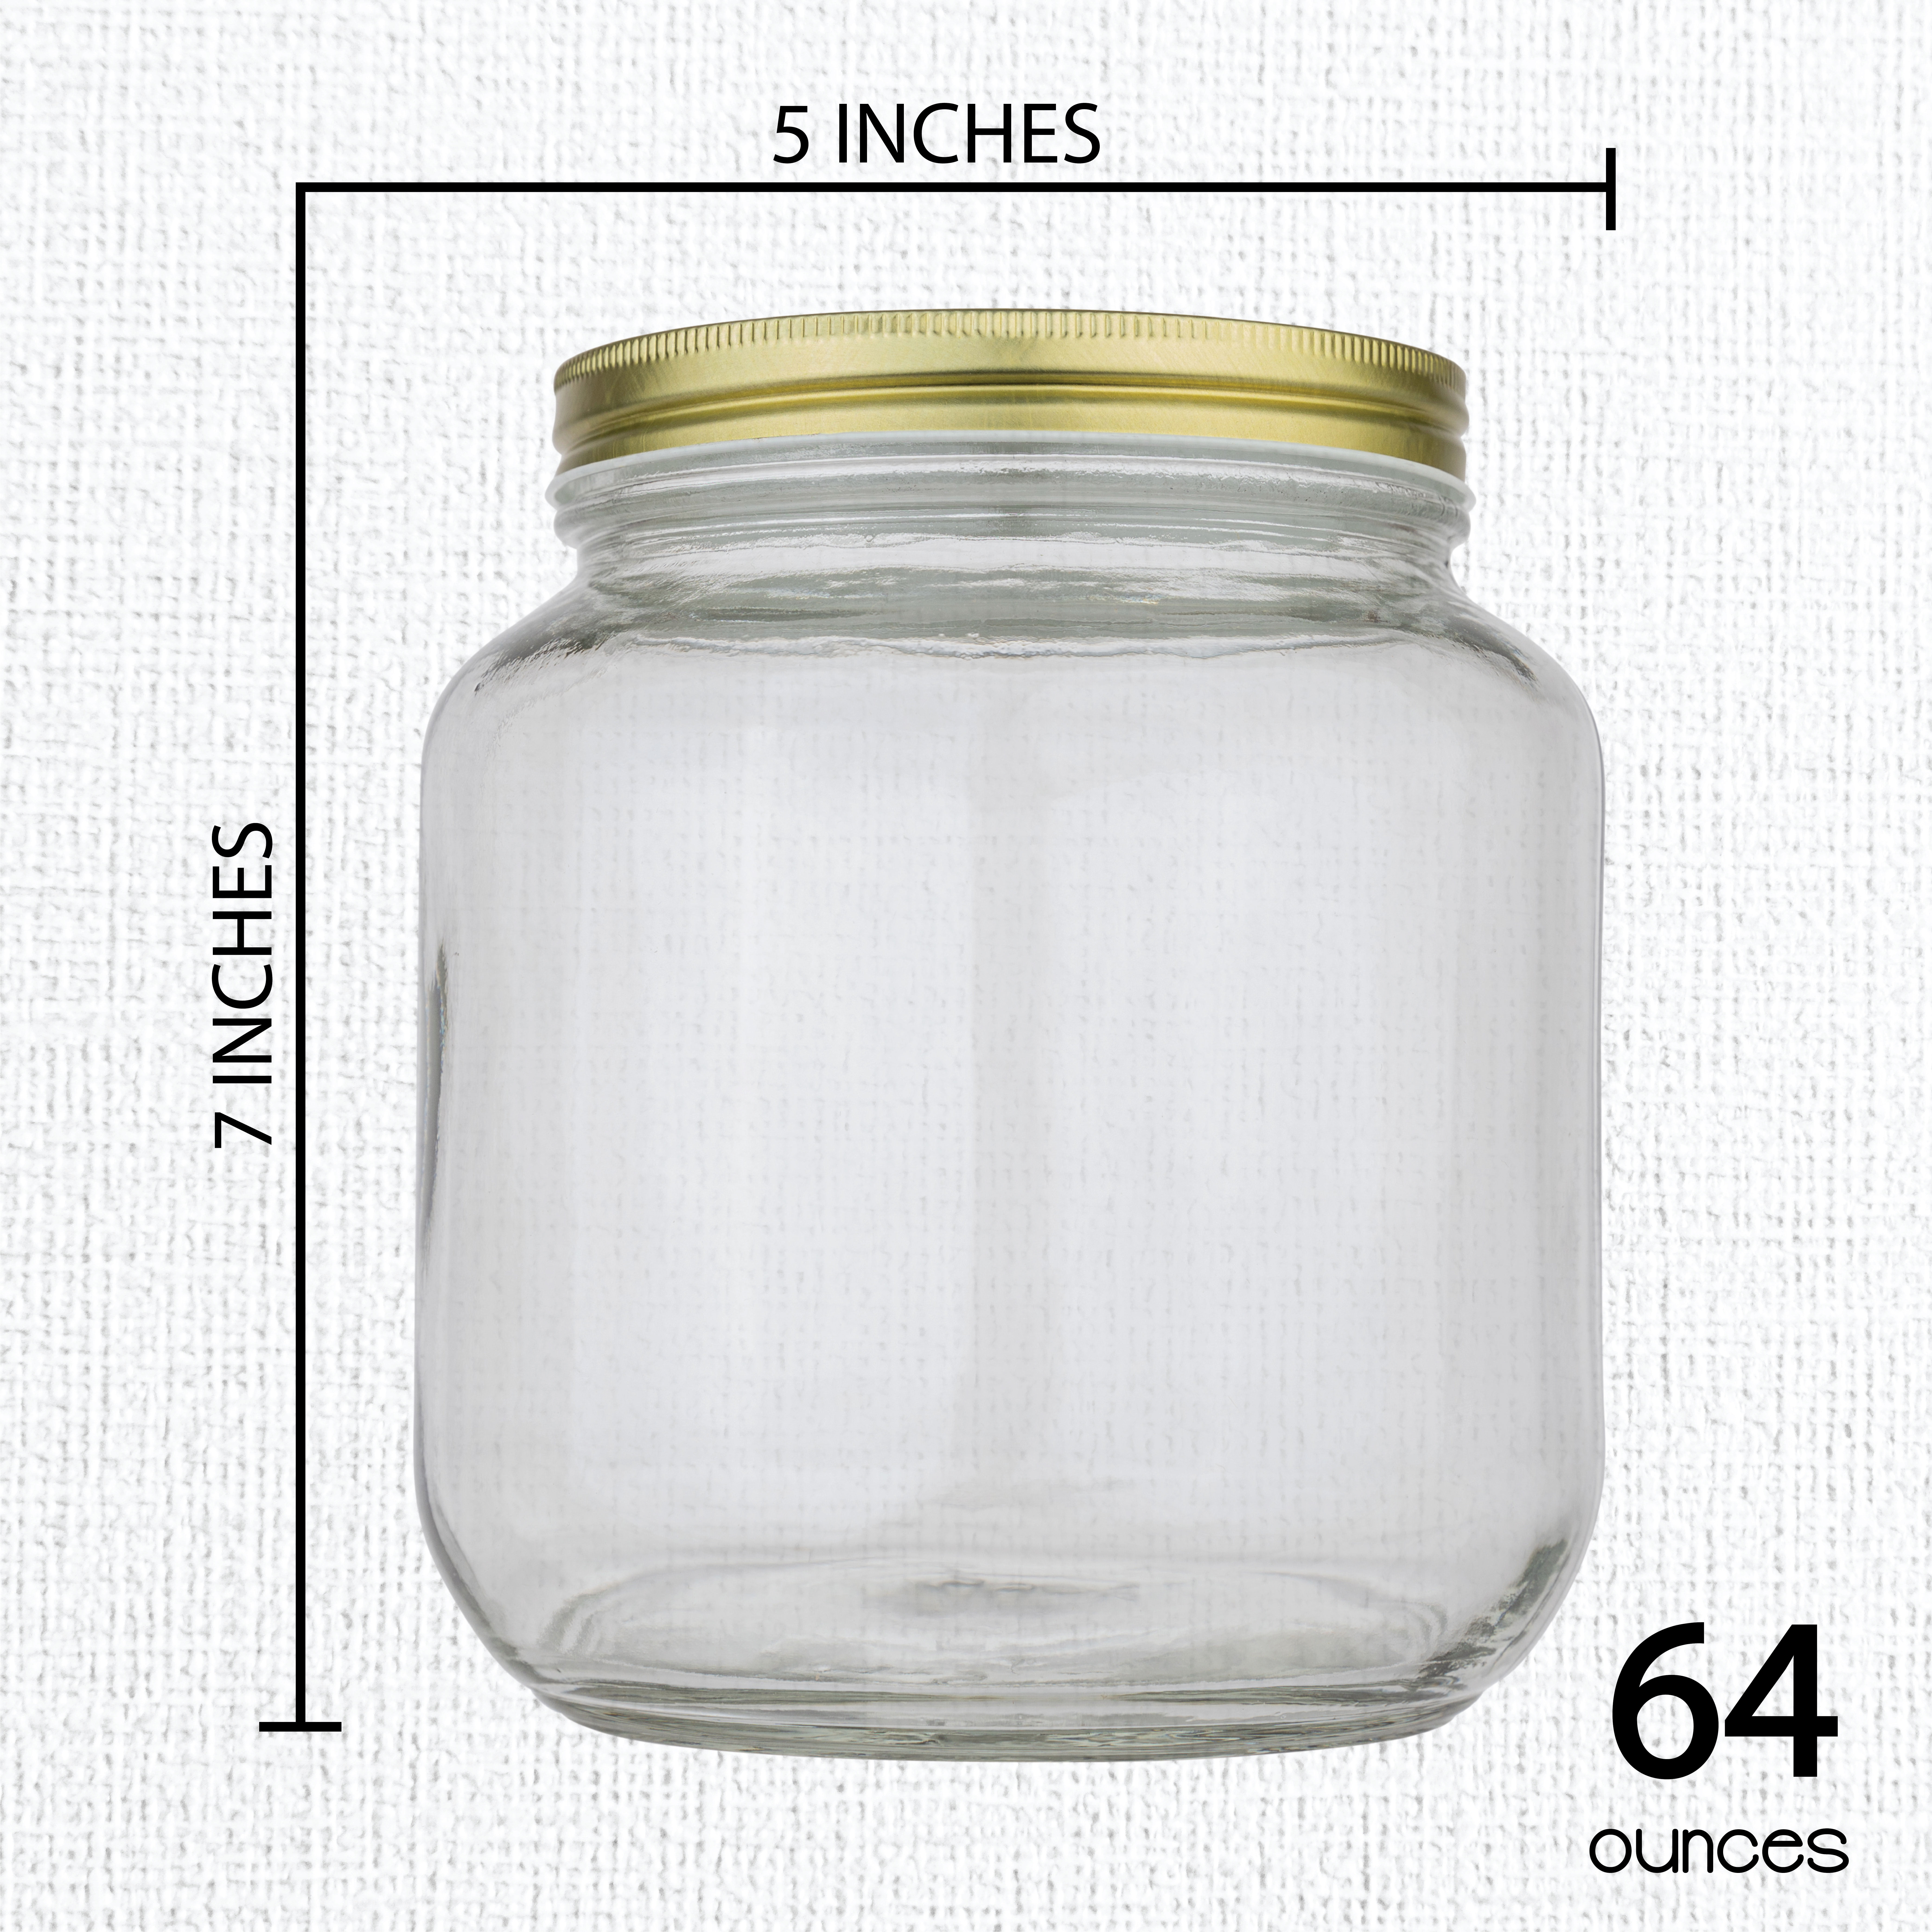 kitchentoolz 1 Gallon Extra Large Glass Mason Jar - Wide Mouth with  Airtight Lid - Safe Container for Fermenting, Pickling, and Storing